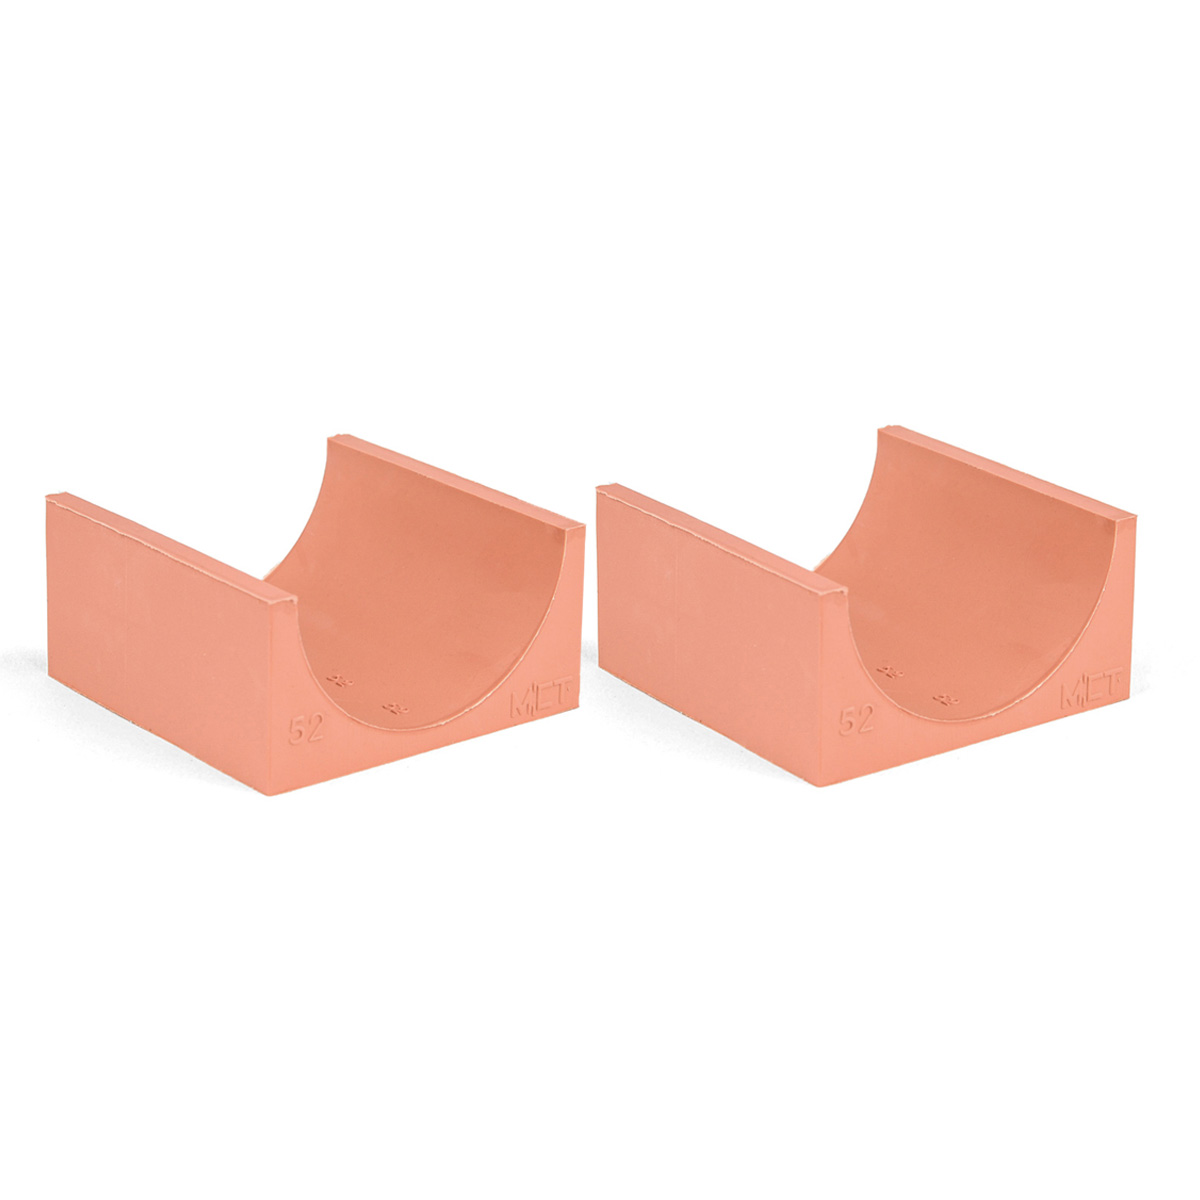 60-52*2 Set of 2 half insert block lycron, 60-52 for cable/pipe diam. 51.5-53.5mm